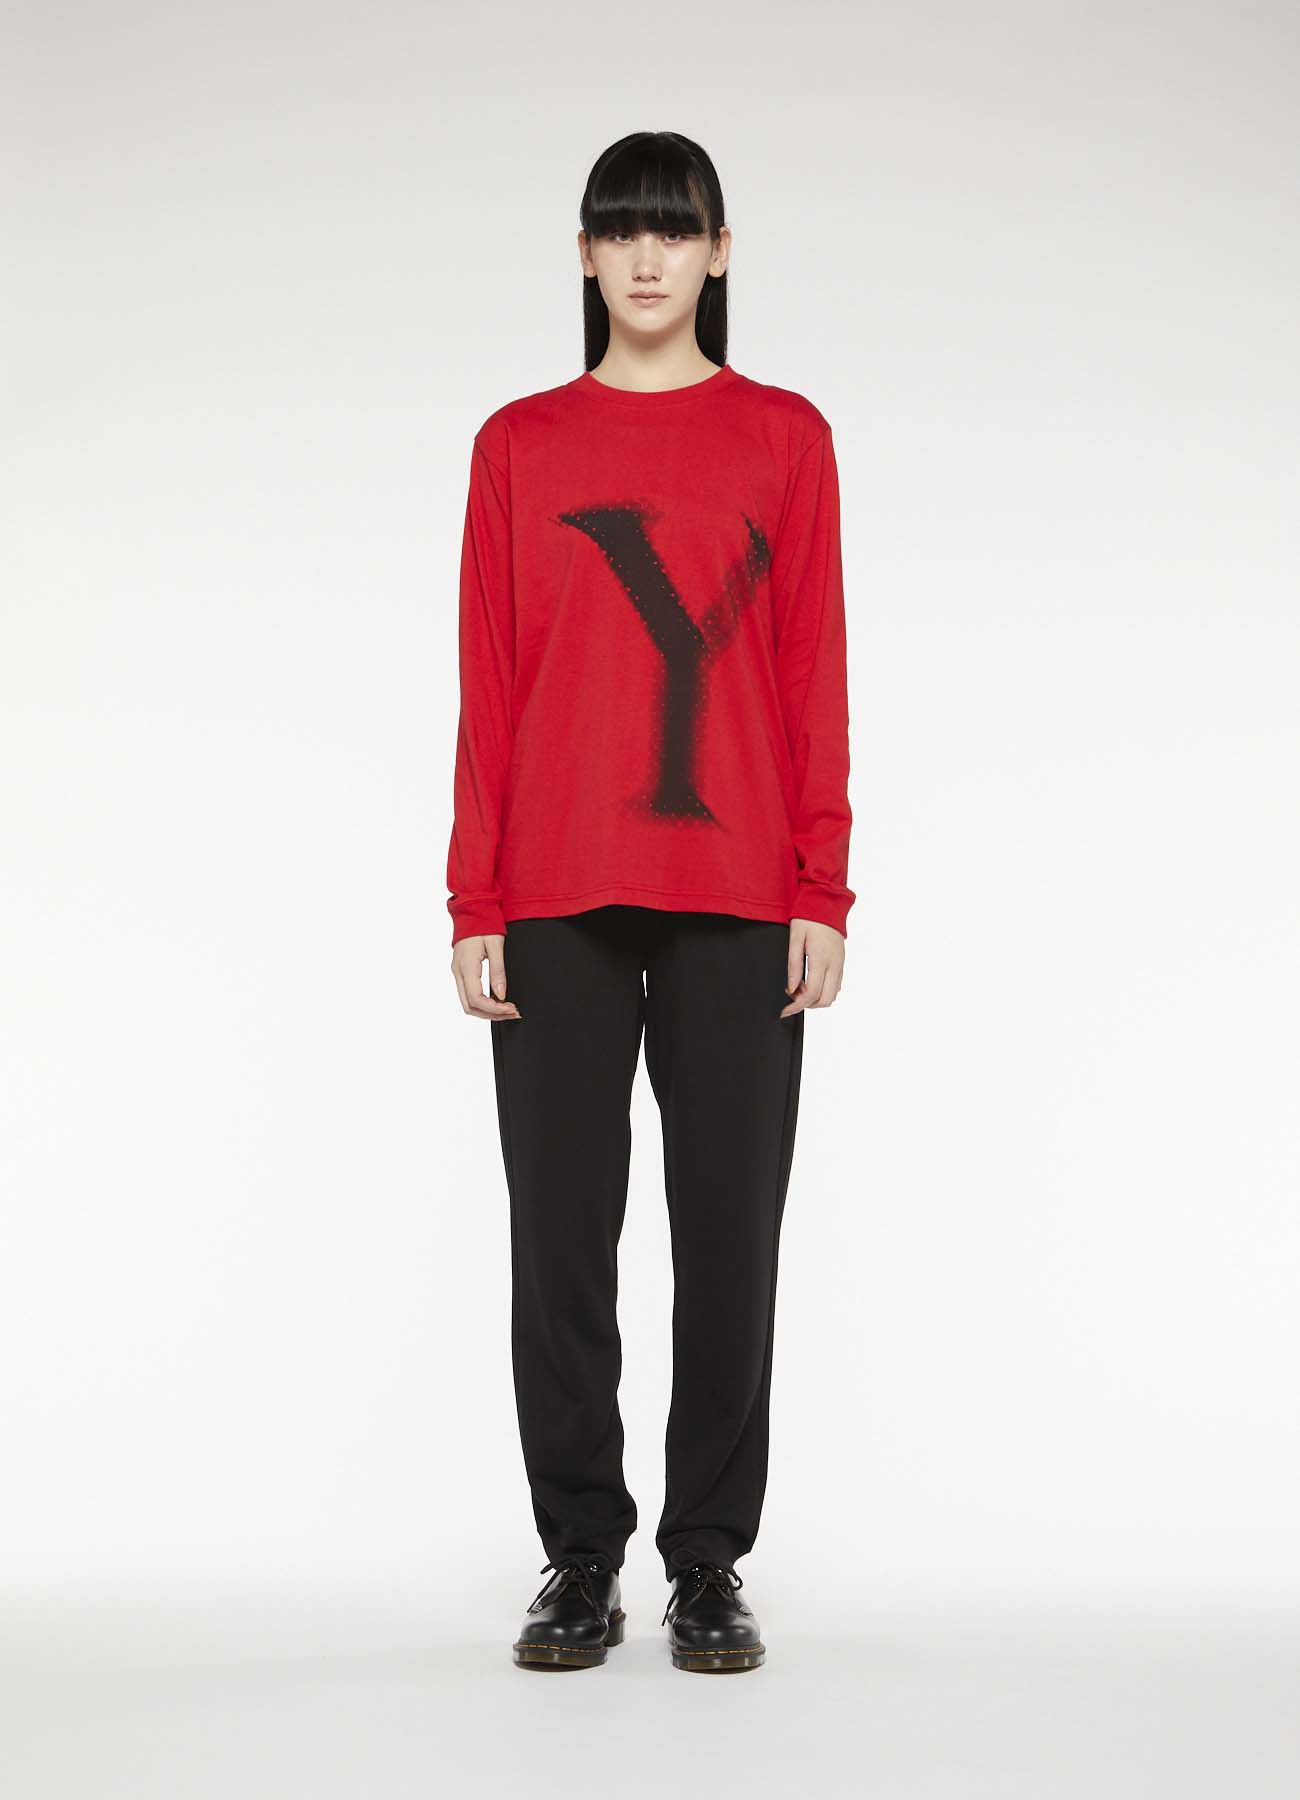 -Online EXCLUSIVE- Y's Big logo Long sleeve T-shirts